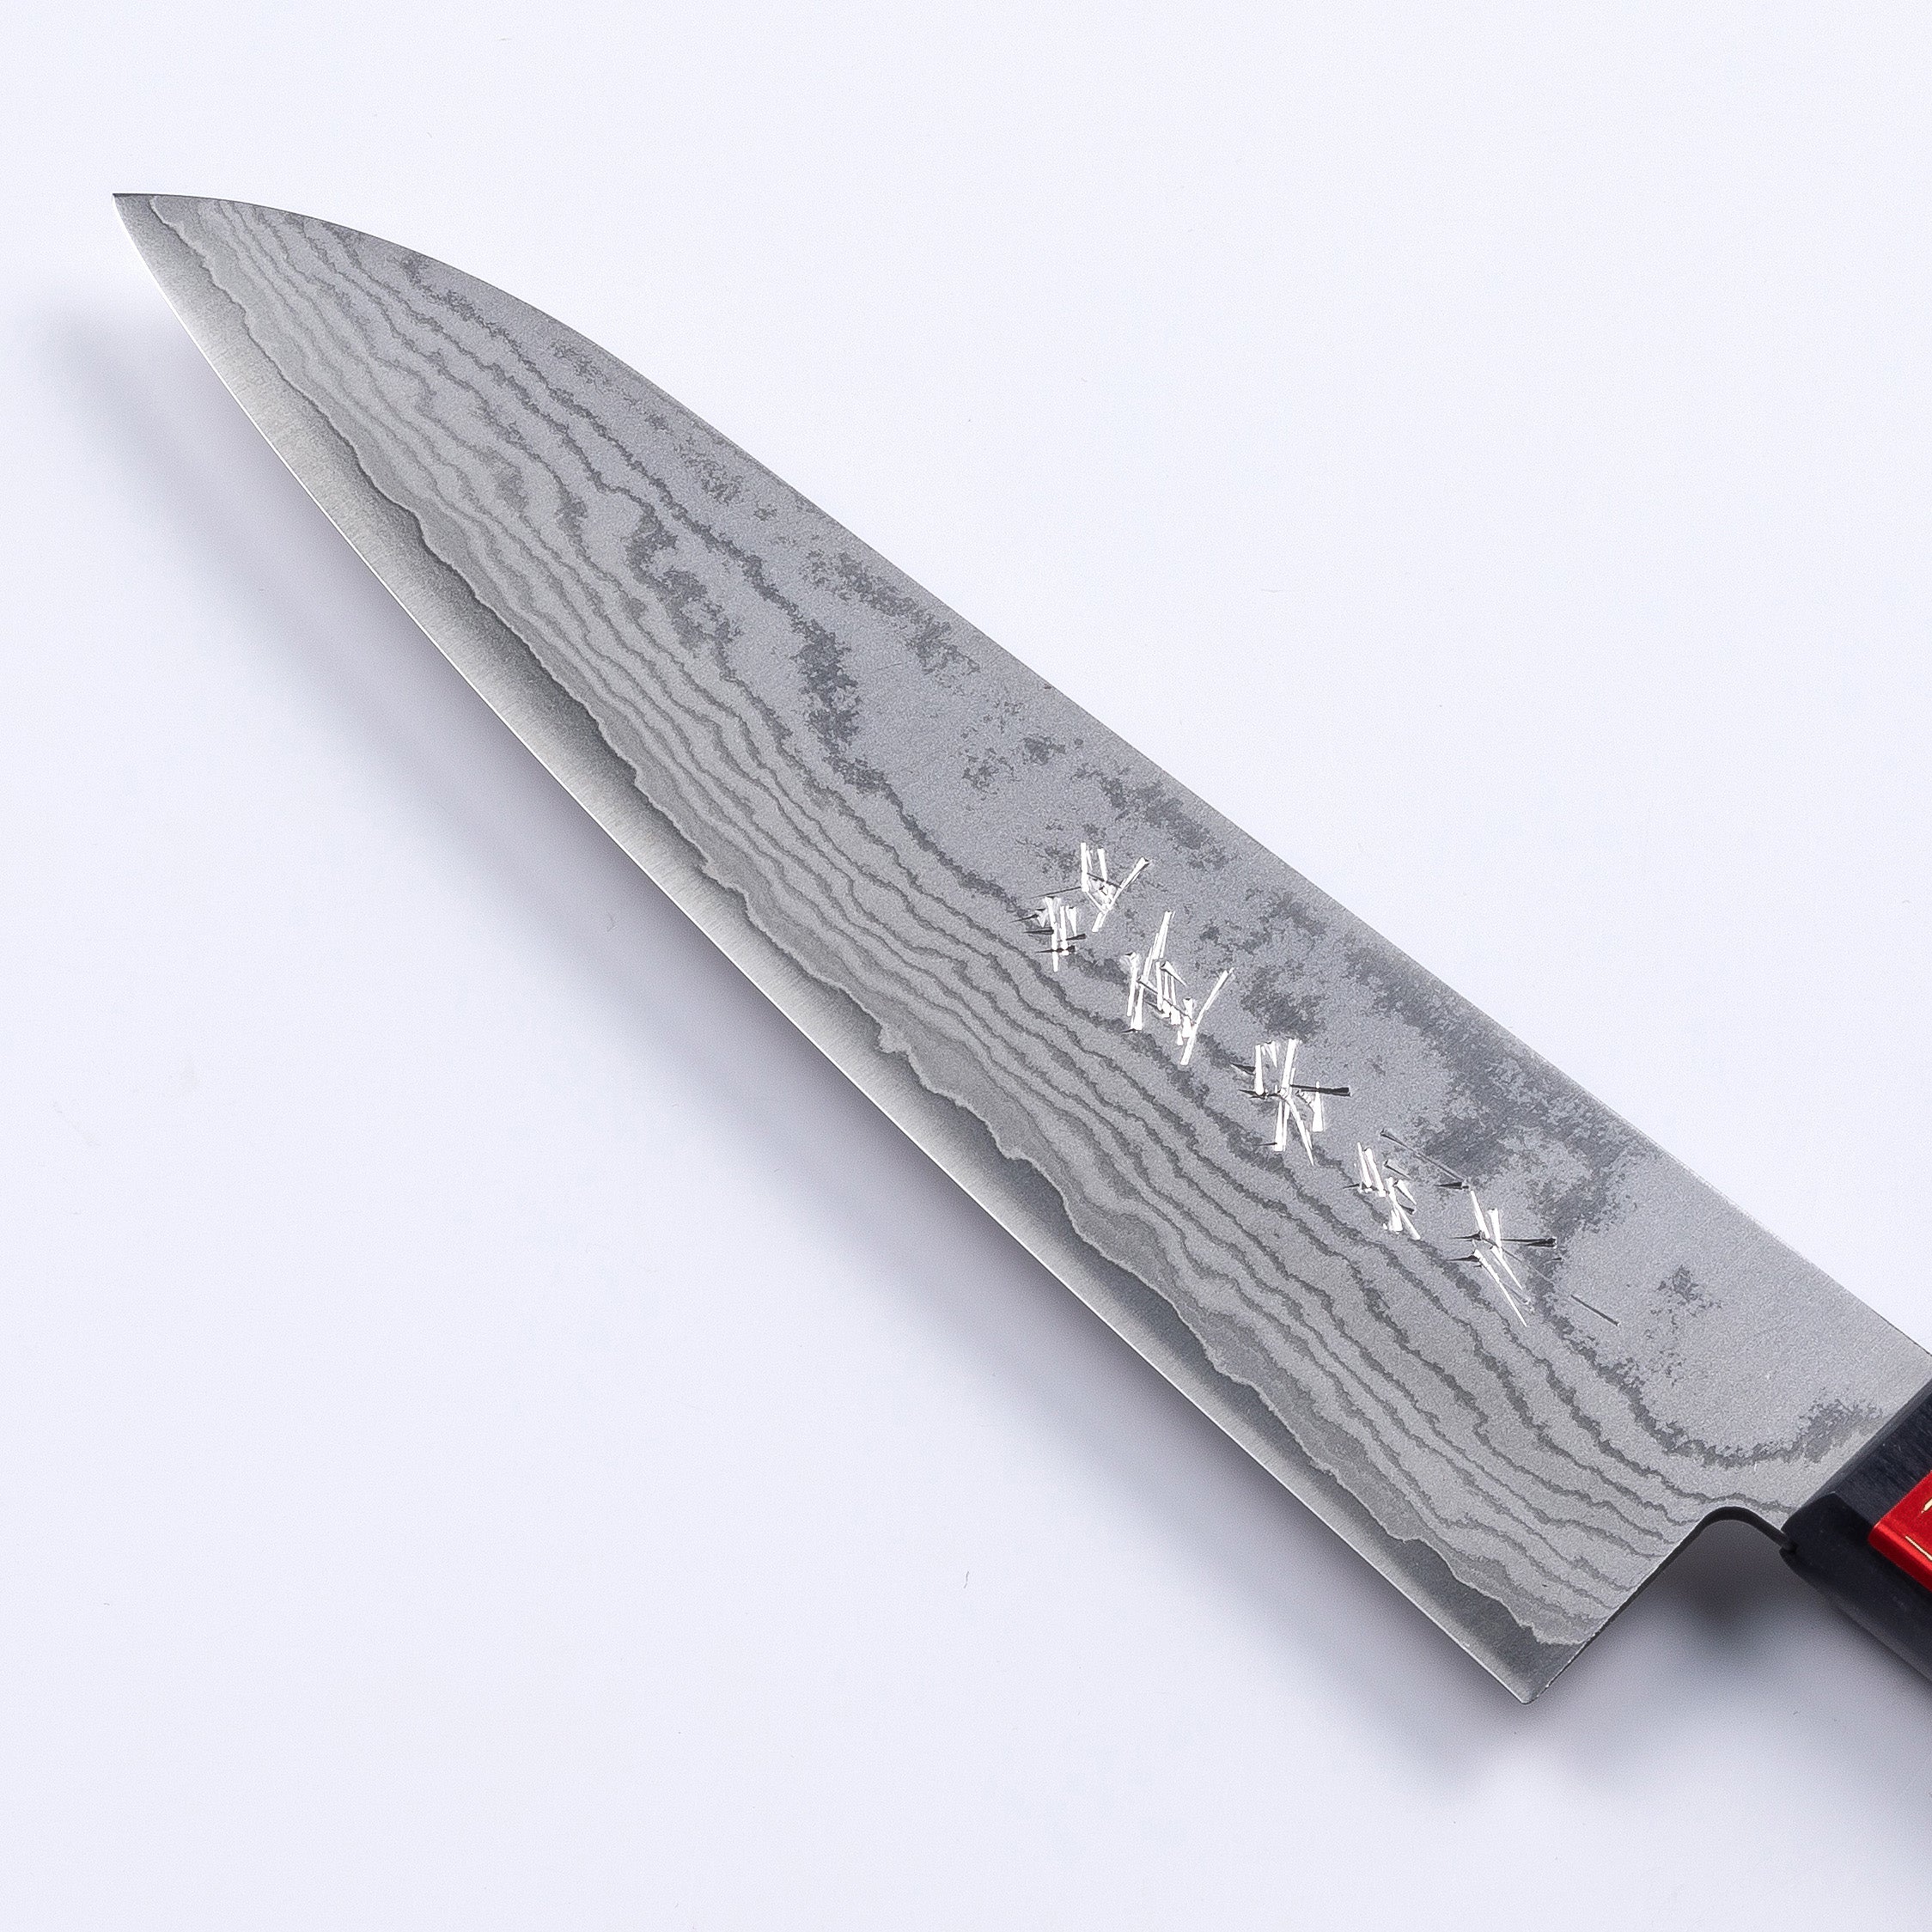 "SHIGEHIRO SPECIAL" Gyuto Special Edition (Chef's Knife) VG10 Damascus, 185mm